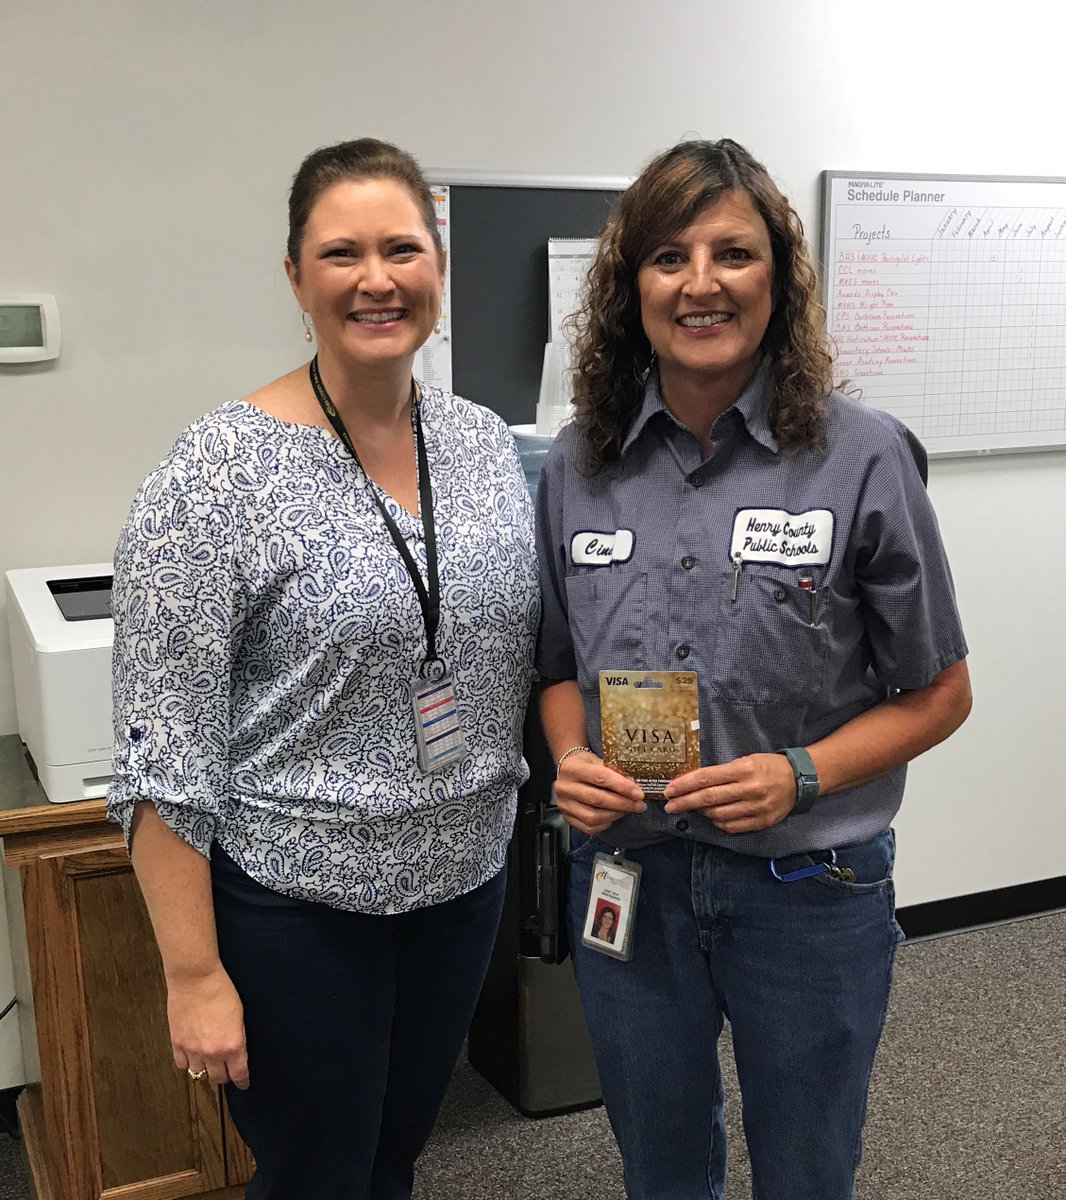 During the month of July, all employee who signed up for LiveHealth Online were entered into a prize drawing.  Congratulations to our winner, Cindy Seay of Facilities Maintenance, who took home a $25 VISA gift card!  Stay tuned for more challenges throughout the year!